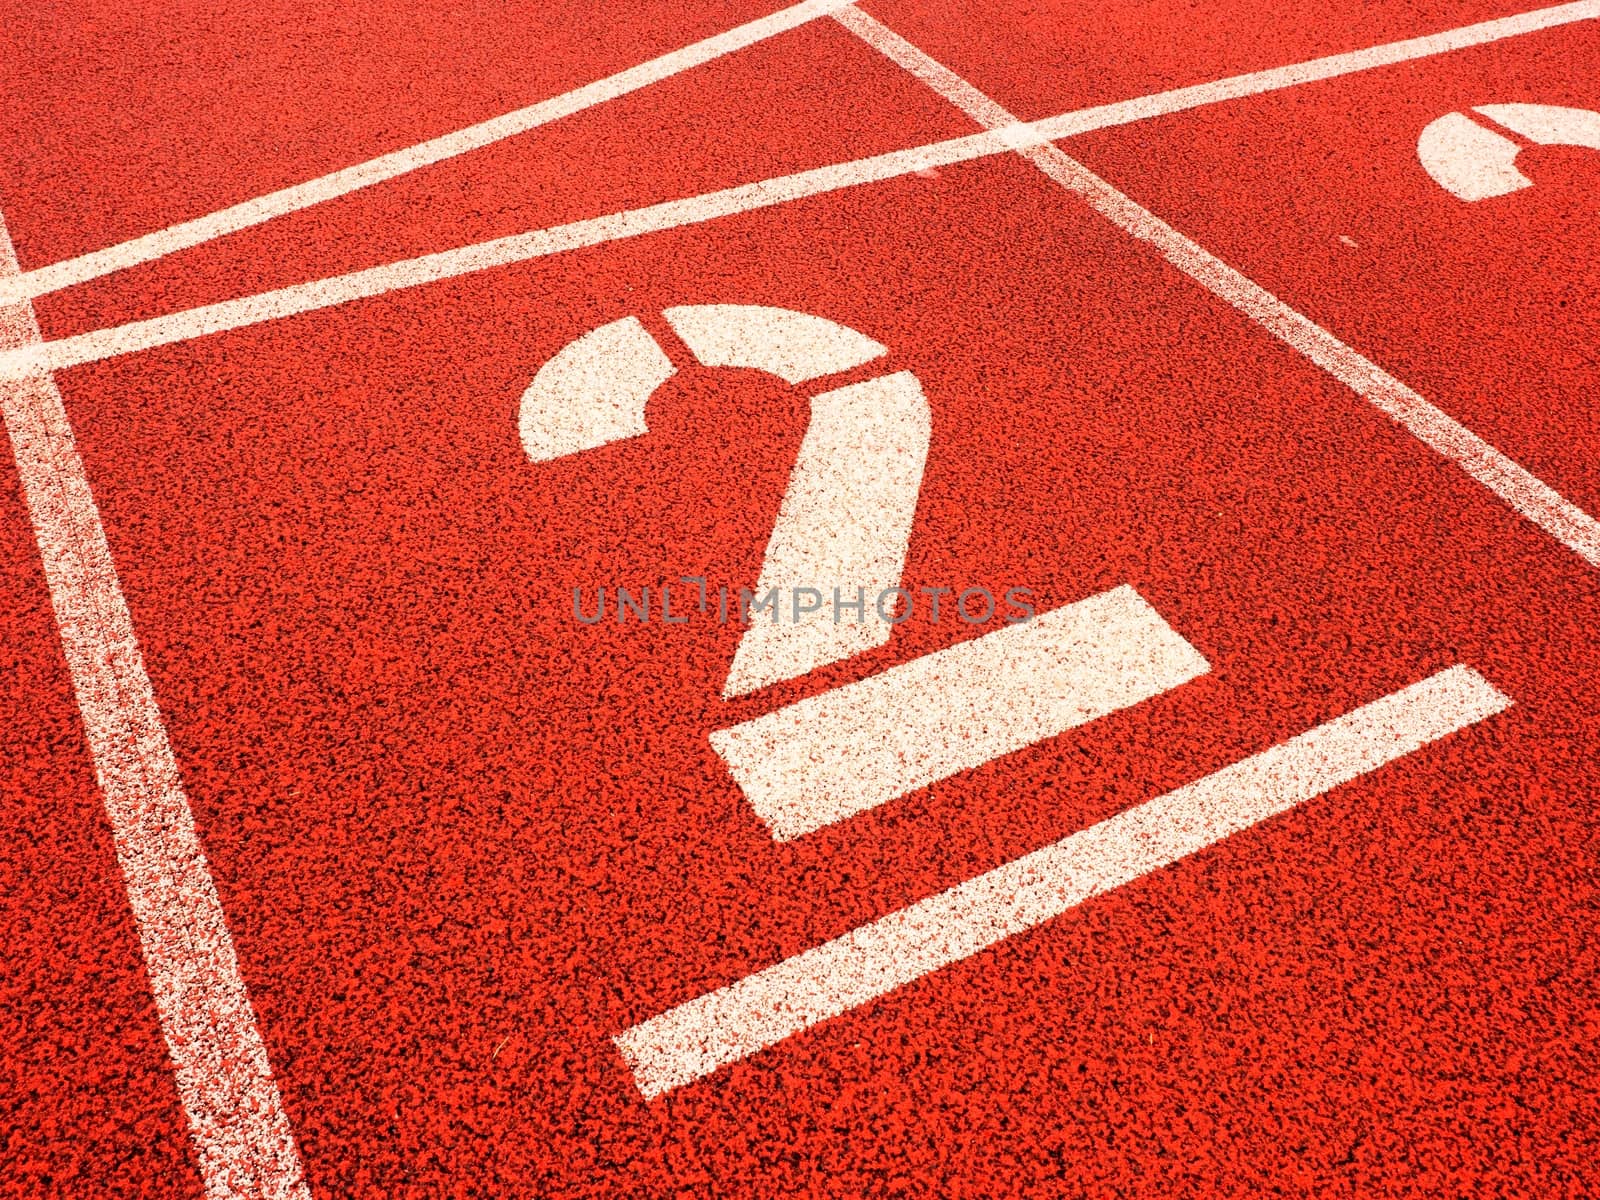 Number two. Big white track number on red rubber racetrack. Gentle textured running racetracks in small outdoor stadium.